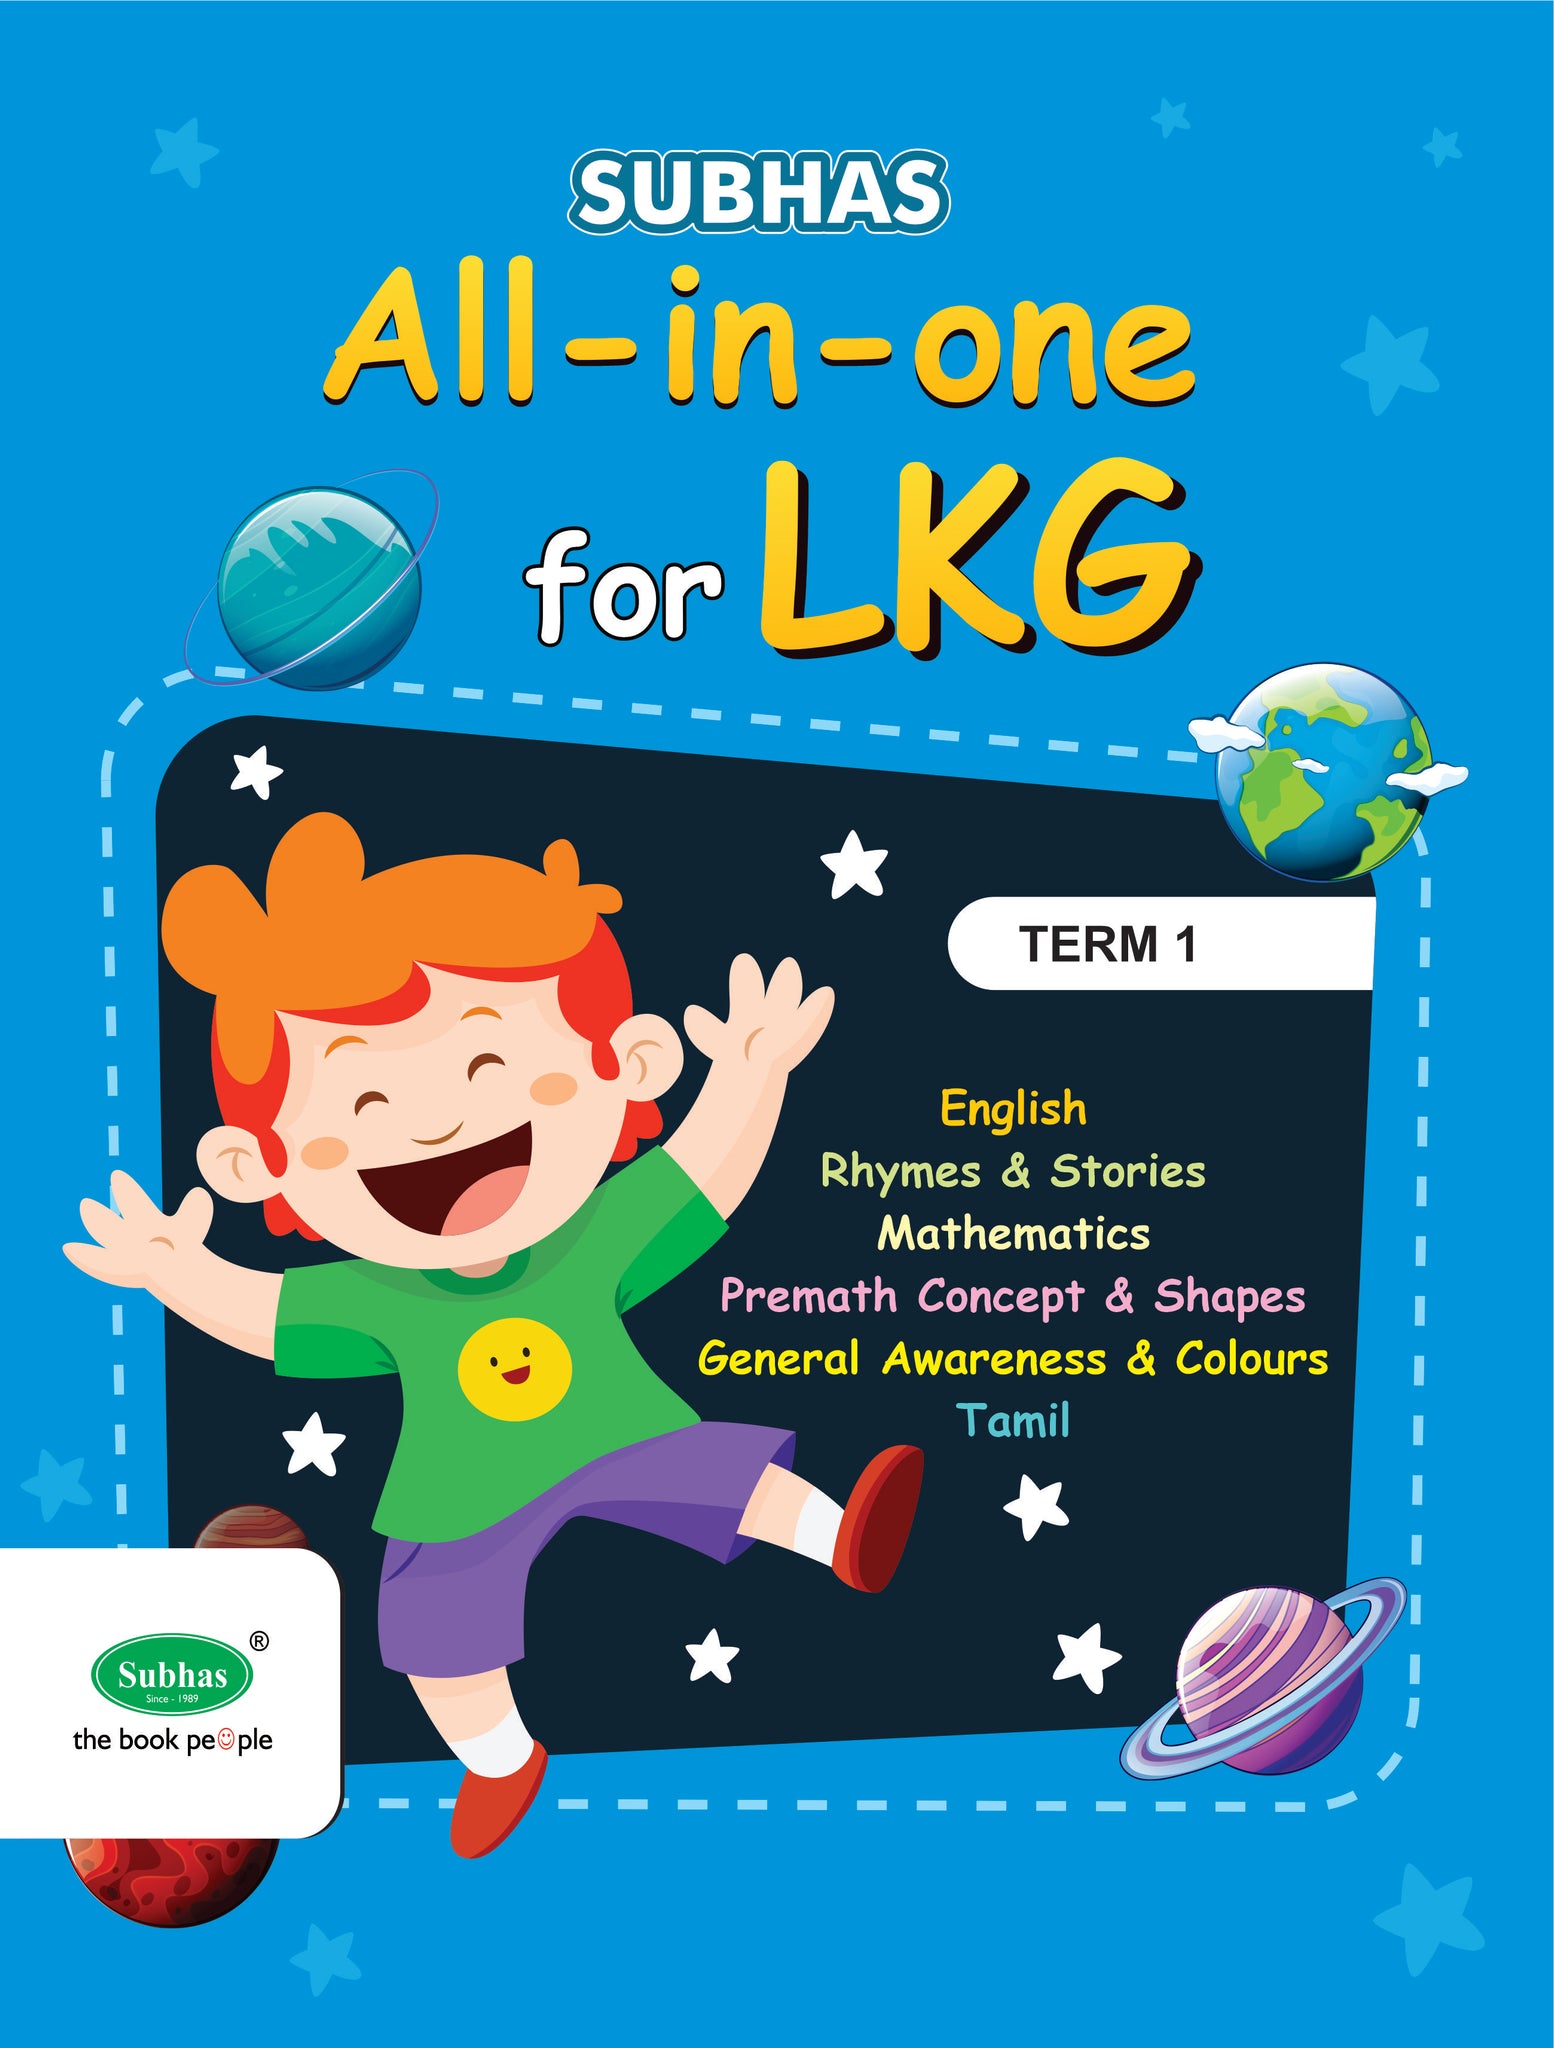 Subhas All in One LKG for Term 1